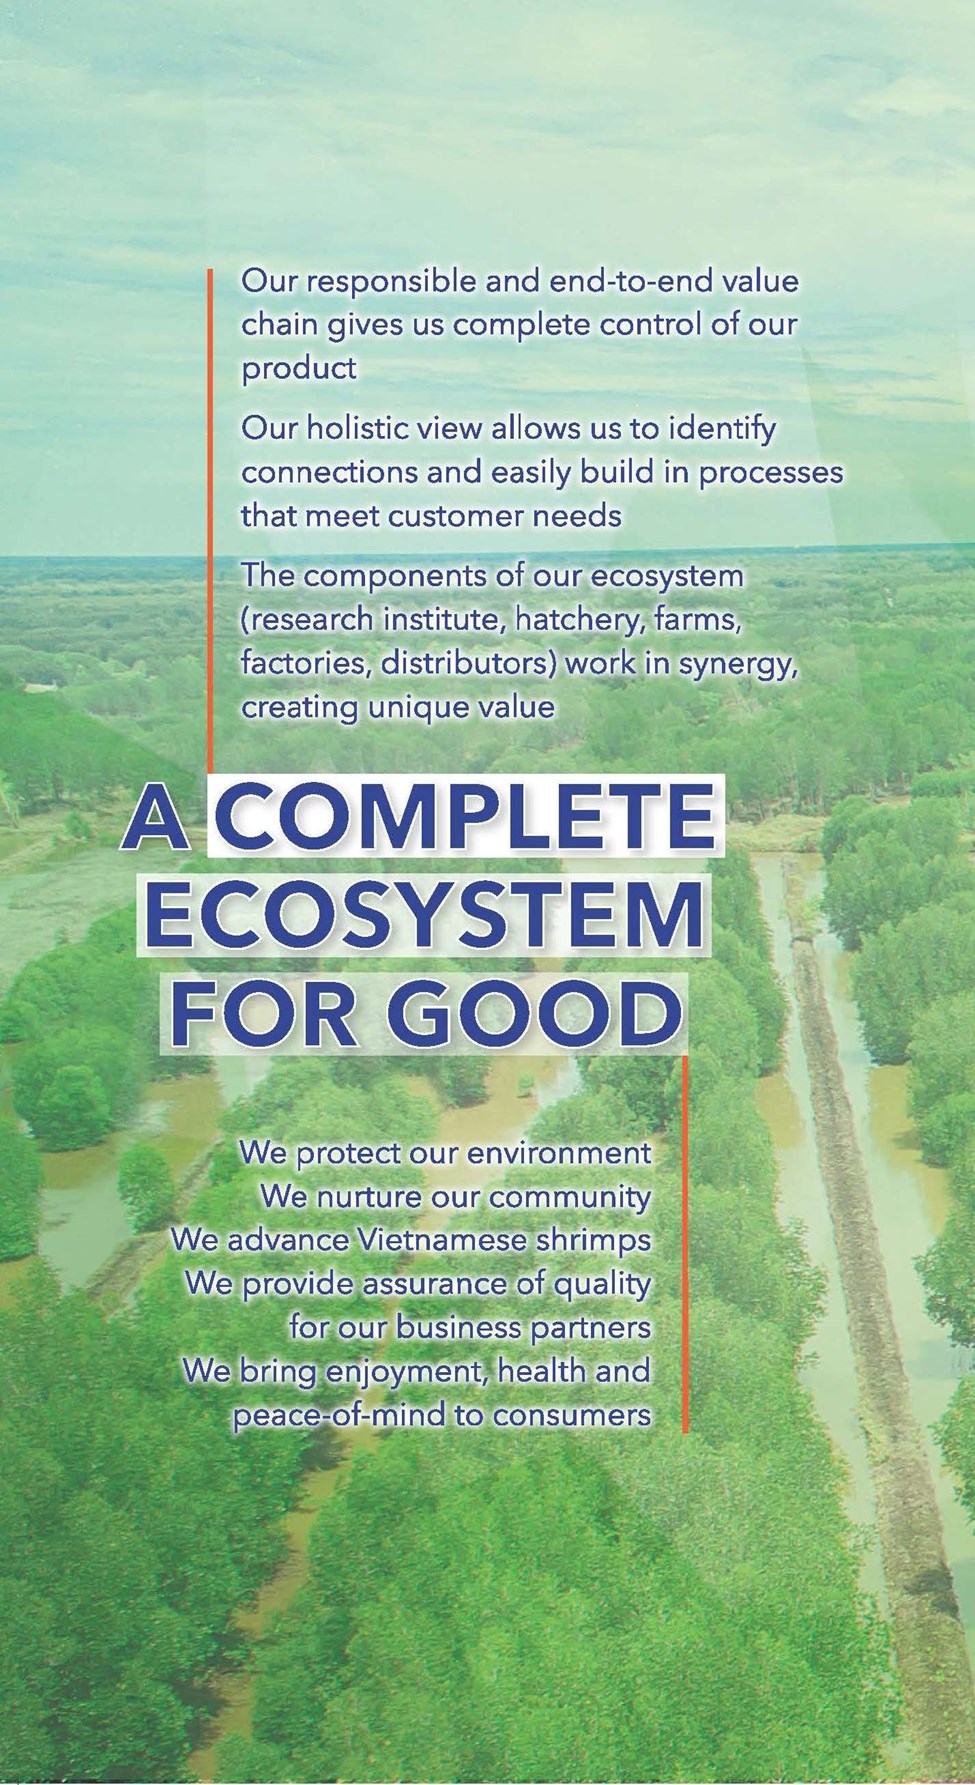 A complete ecosystem for good